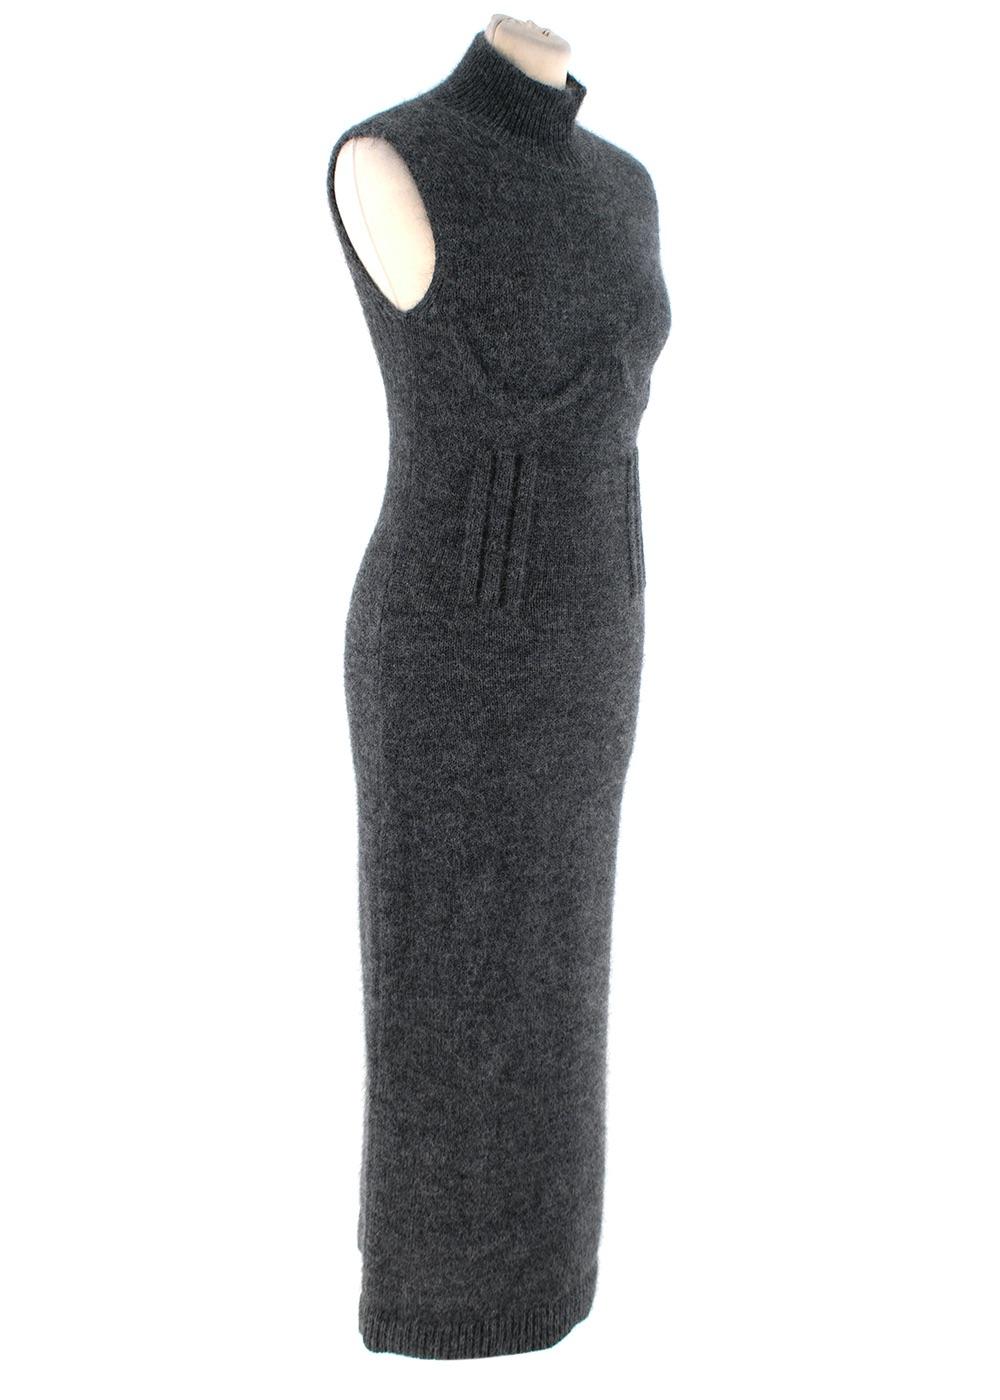 Fendi Steel Grey Seamed Cashmere Knitted Dress

- Mock neck, form-fitting sleeveless dress with seamed underbust cups and faux-boning around the waistline
- Mid-calf length 
- Mid-weight knit 
- Unlined 

Materials
57% Cashmere
28% Mohair wool
13%